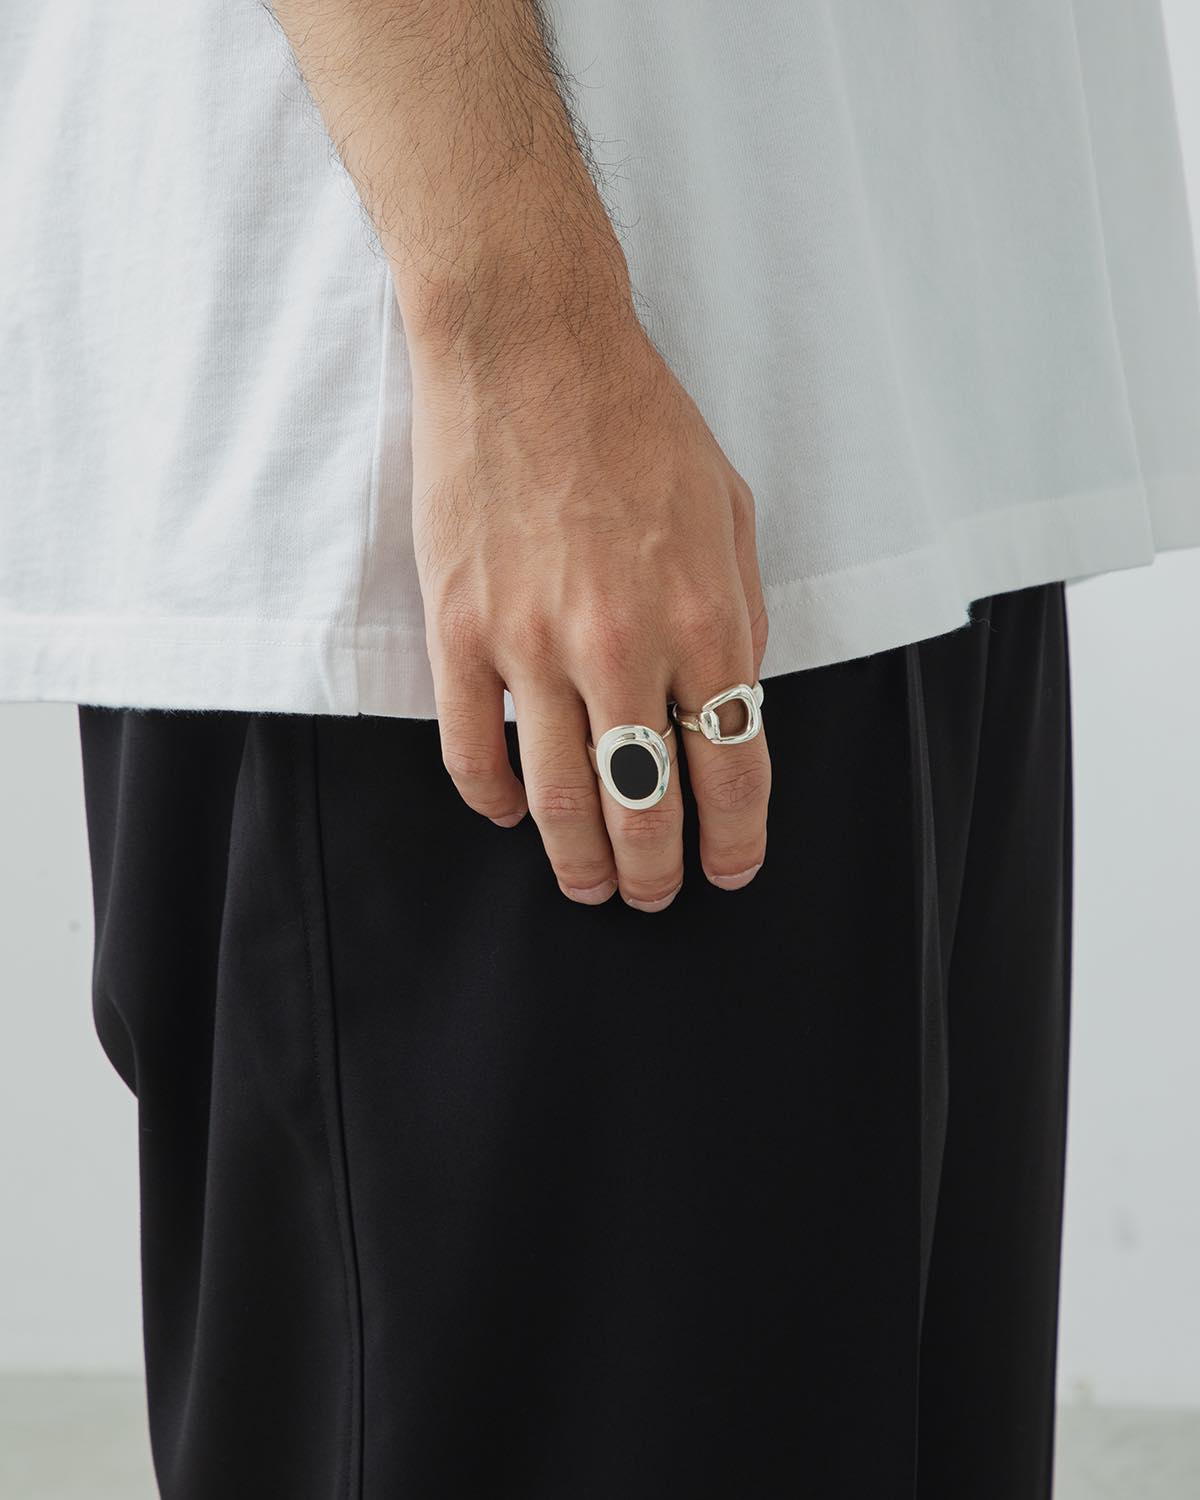 AMULET RING WITH ONYX